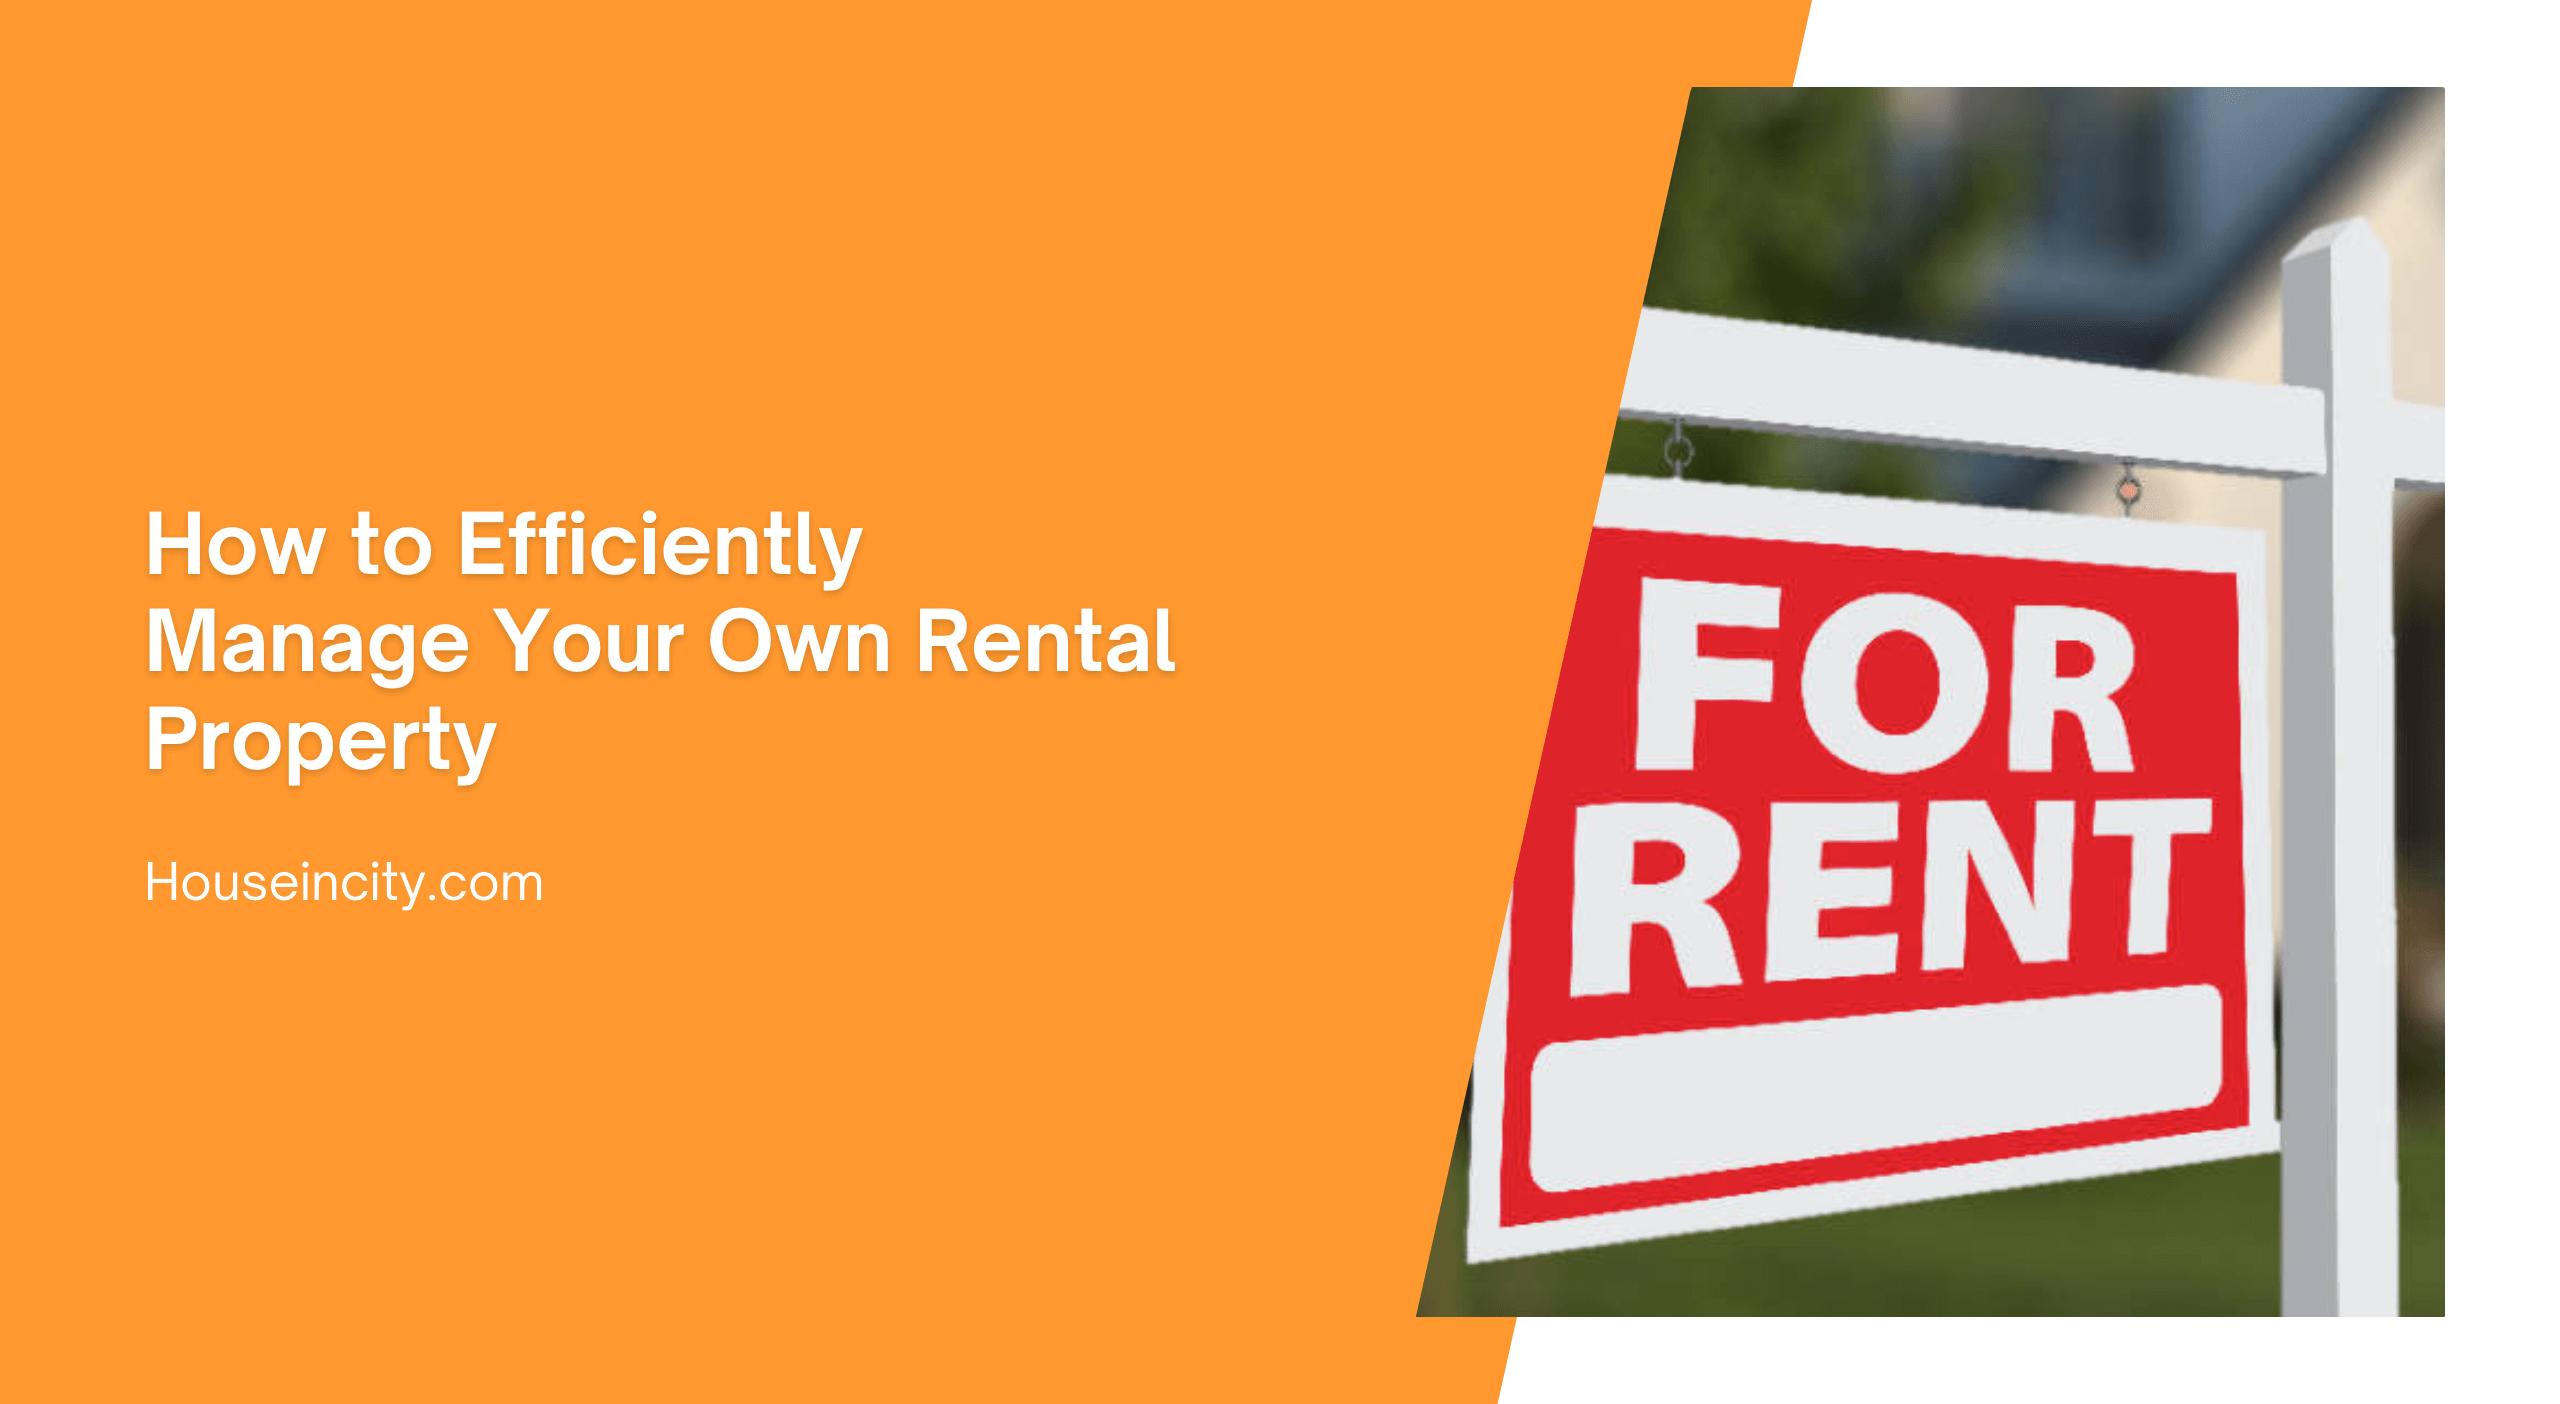 How to Efficiently Manage Your Own Rental Property